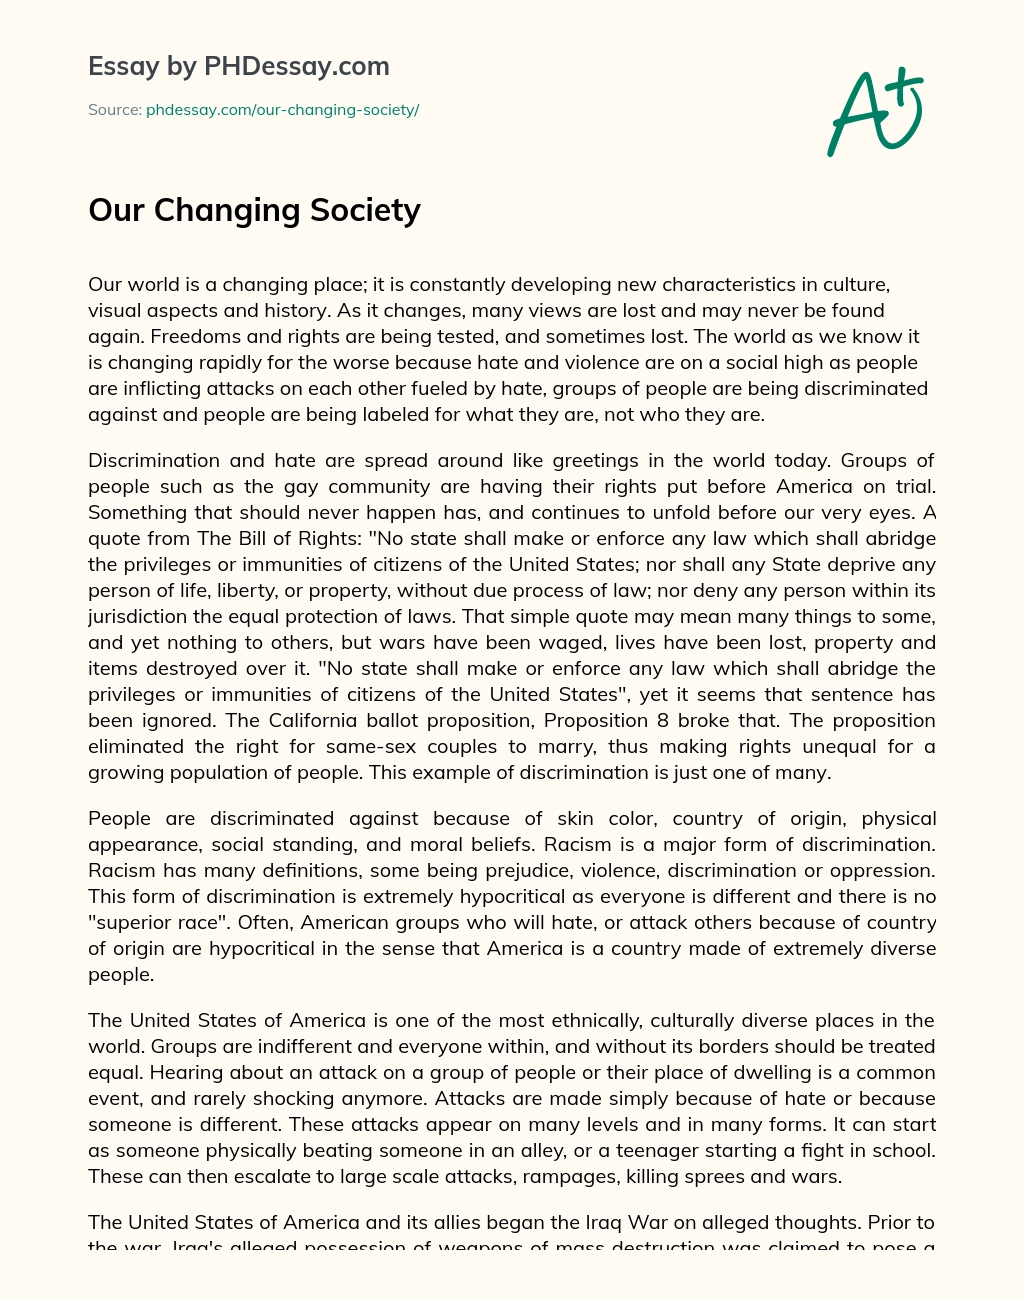 Our Changing Society essay